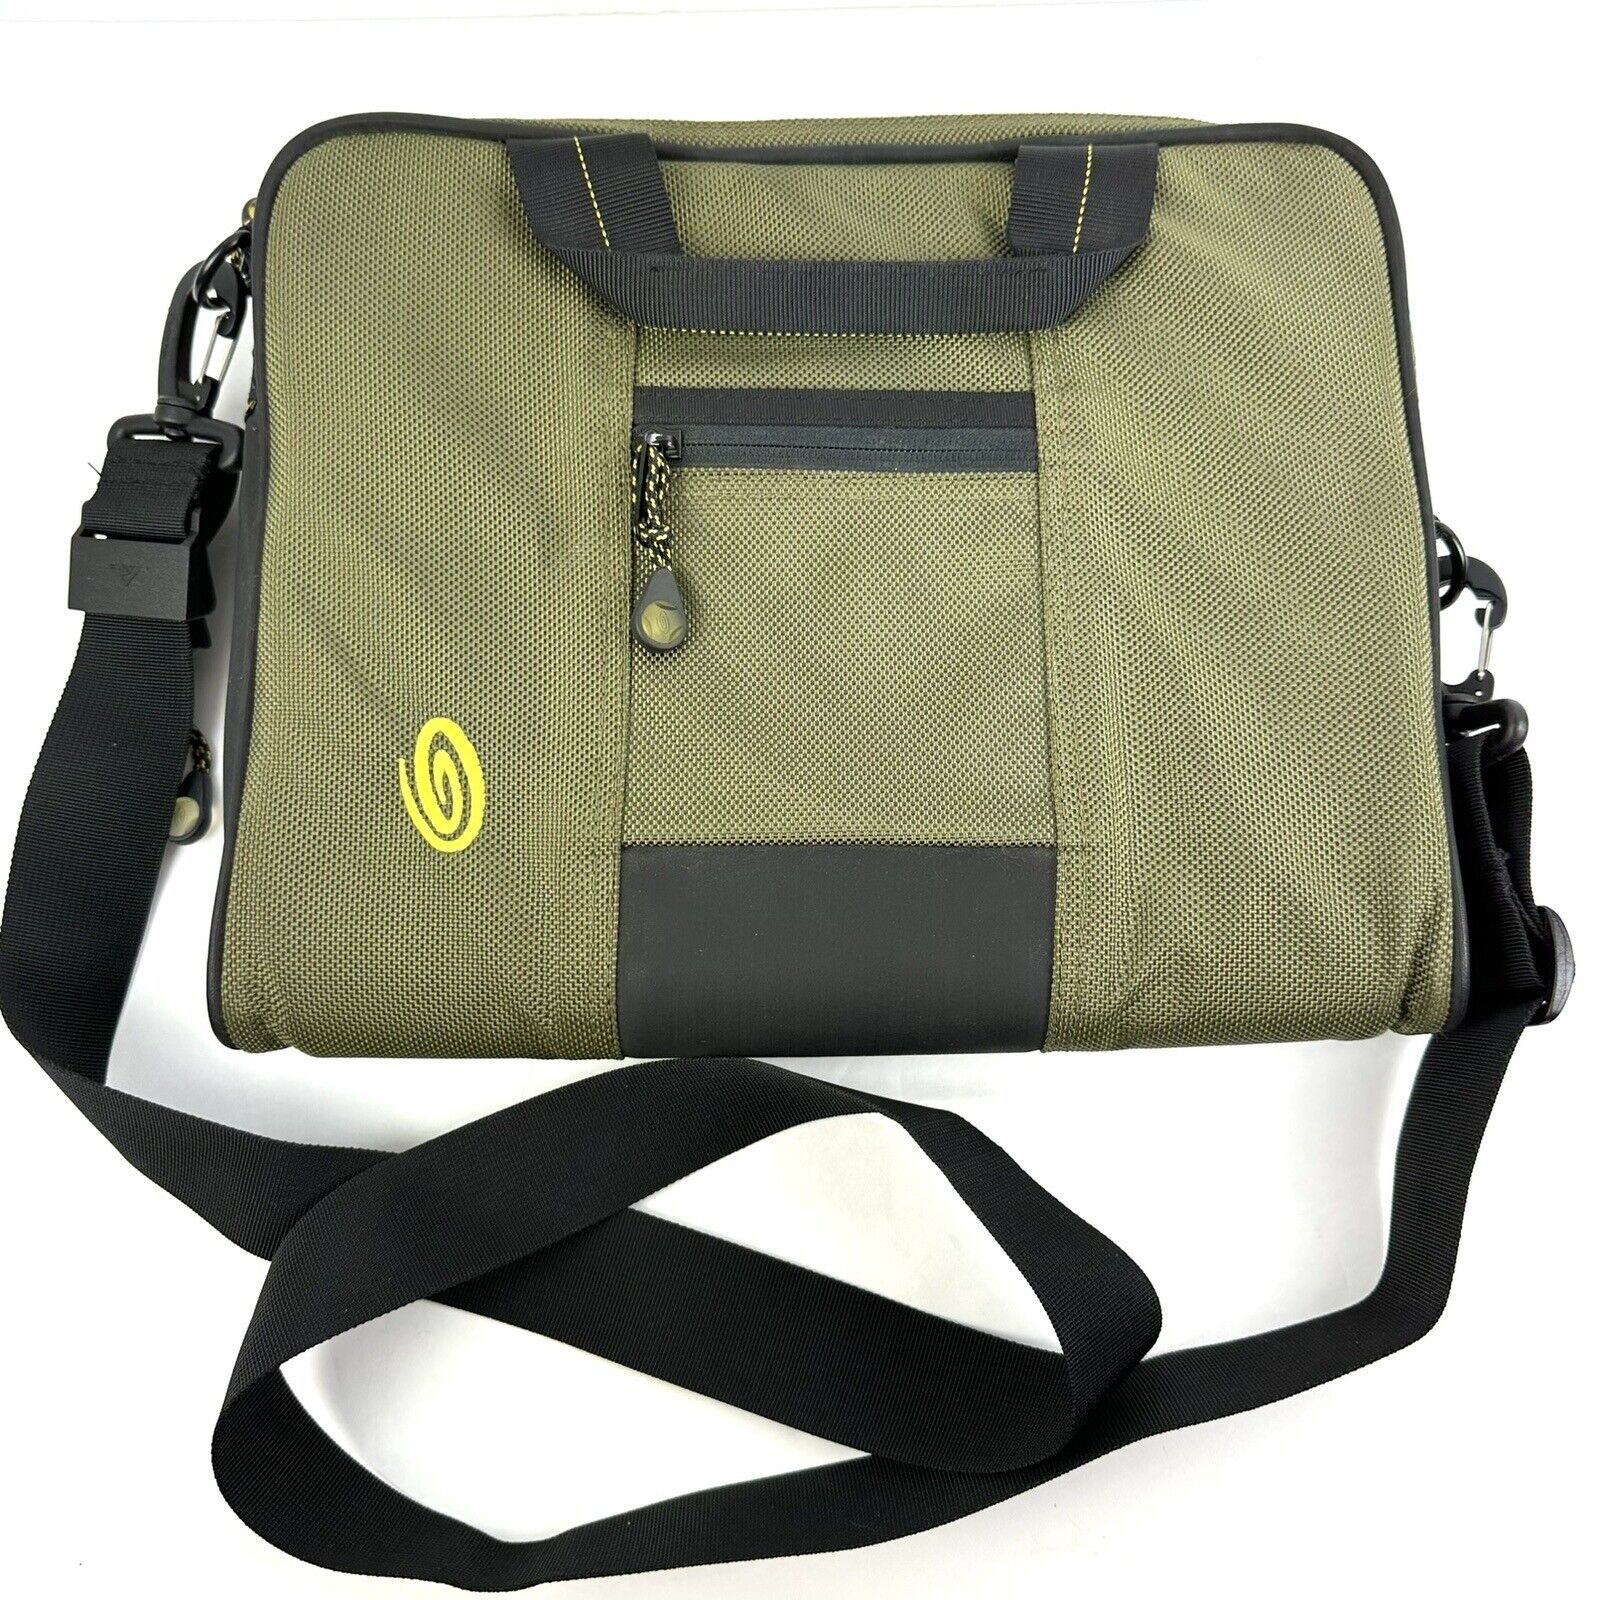 Timbuk2 Laptop Sleeve Case Travel Bag Olive Green Canvas SMALL Tablet Holder